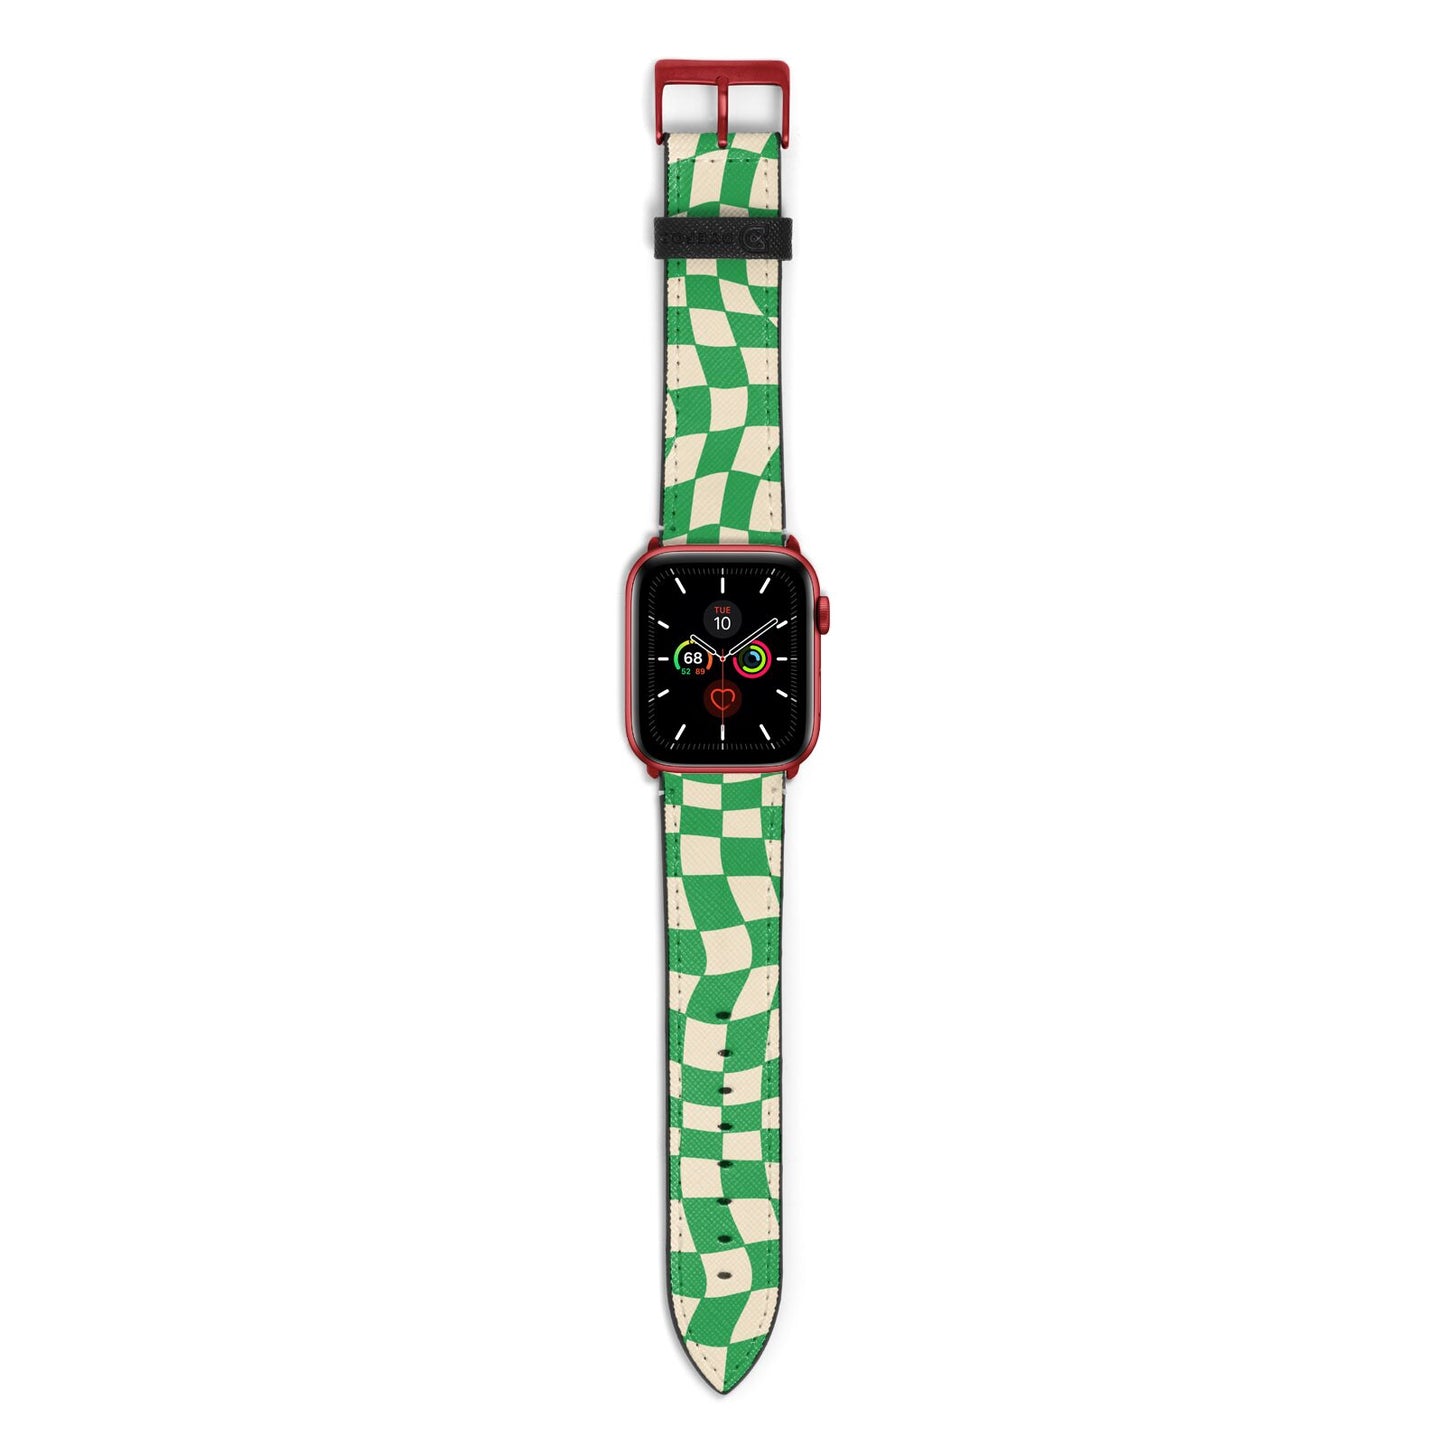 Green Check Apple Watch Strap with Red Hardware